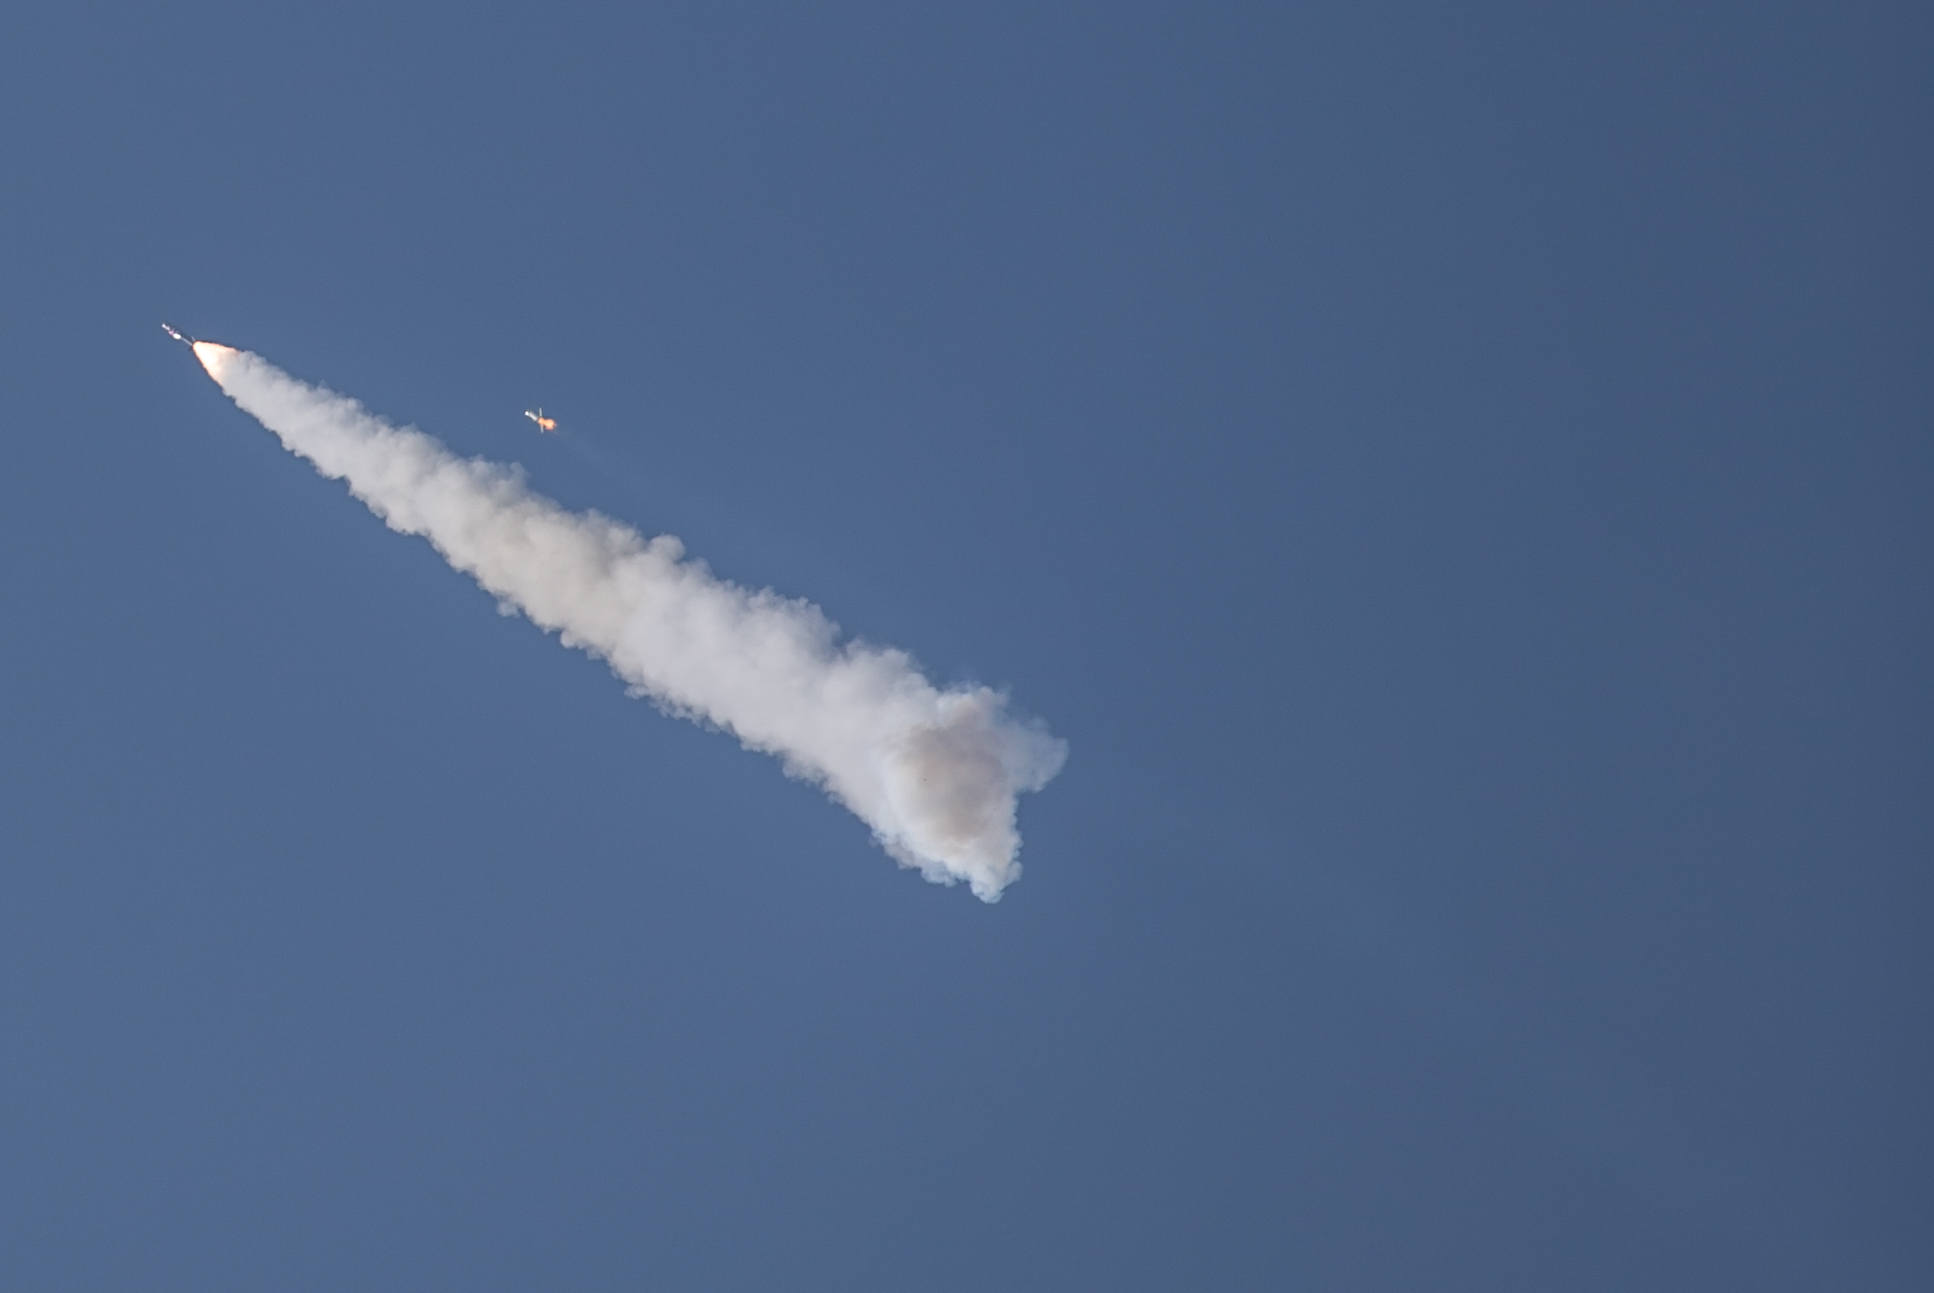 Photo of a sounding rocket stage separation in the sky. The first stage is seen just above the plume cloud, and the second stage with the payload has a plume of smoke under it.